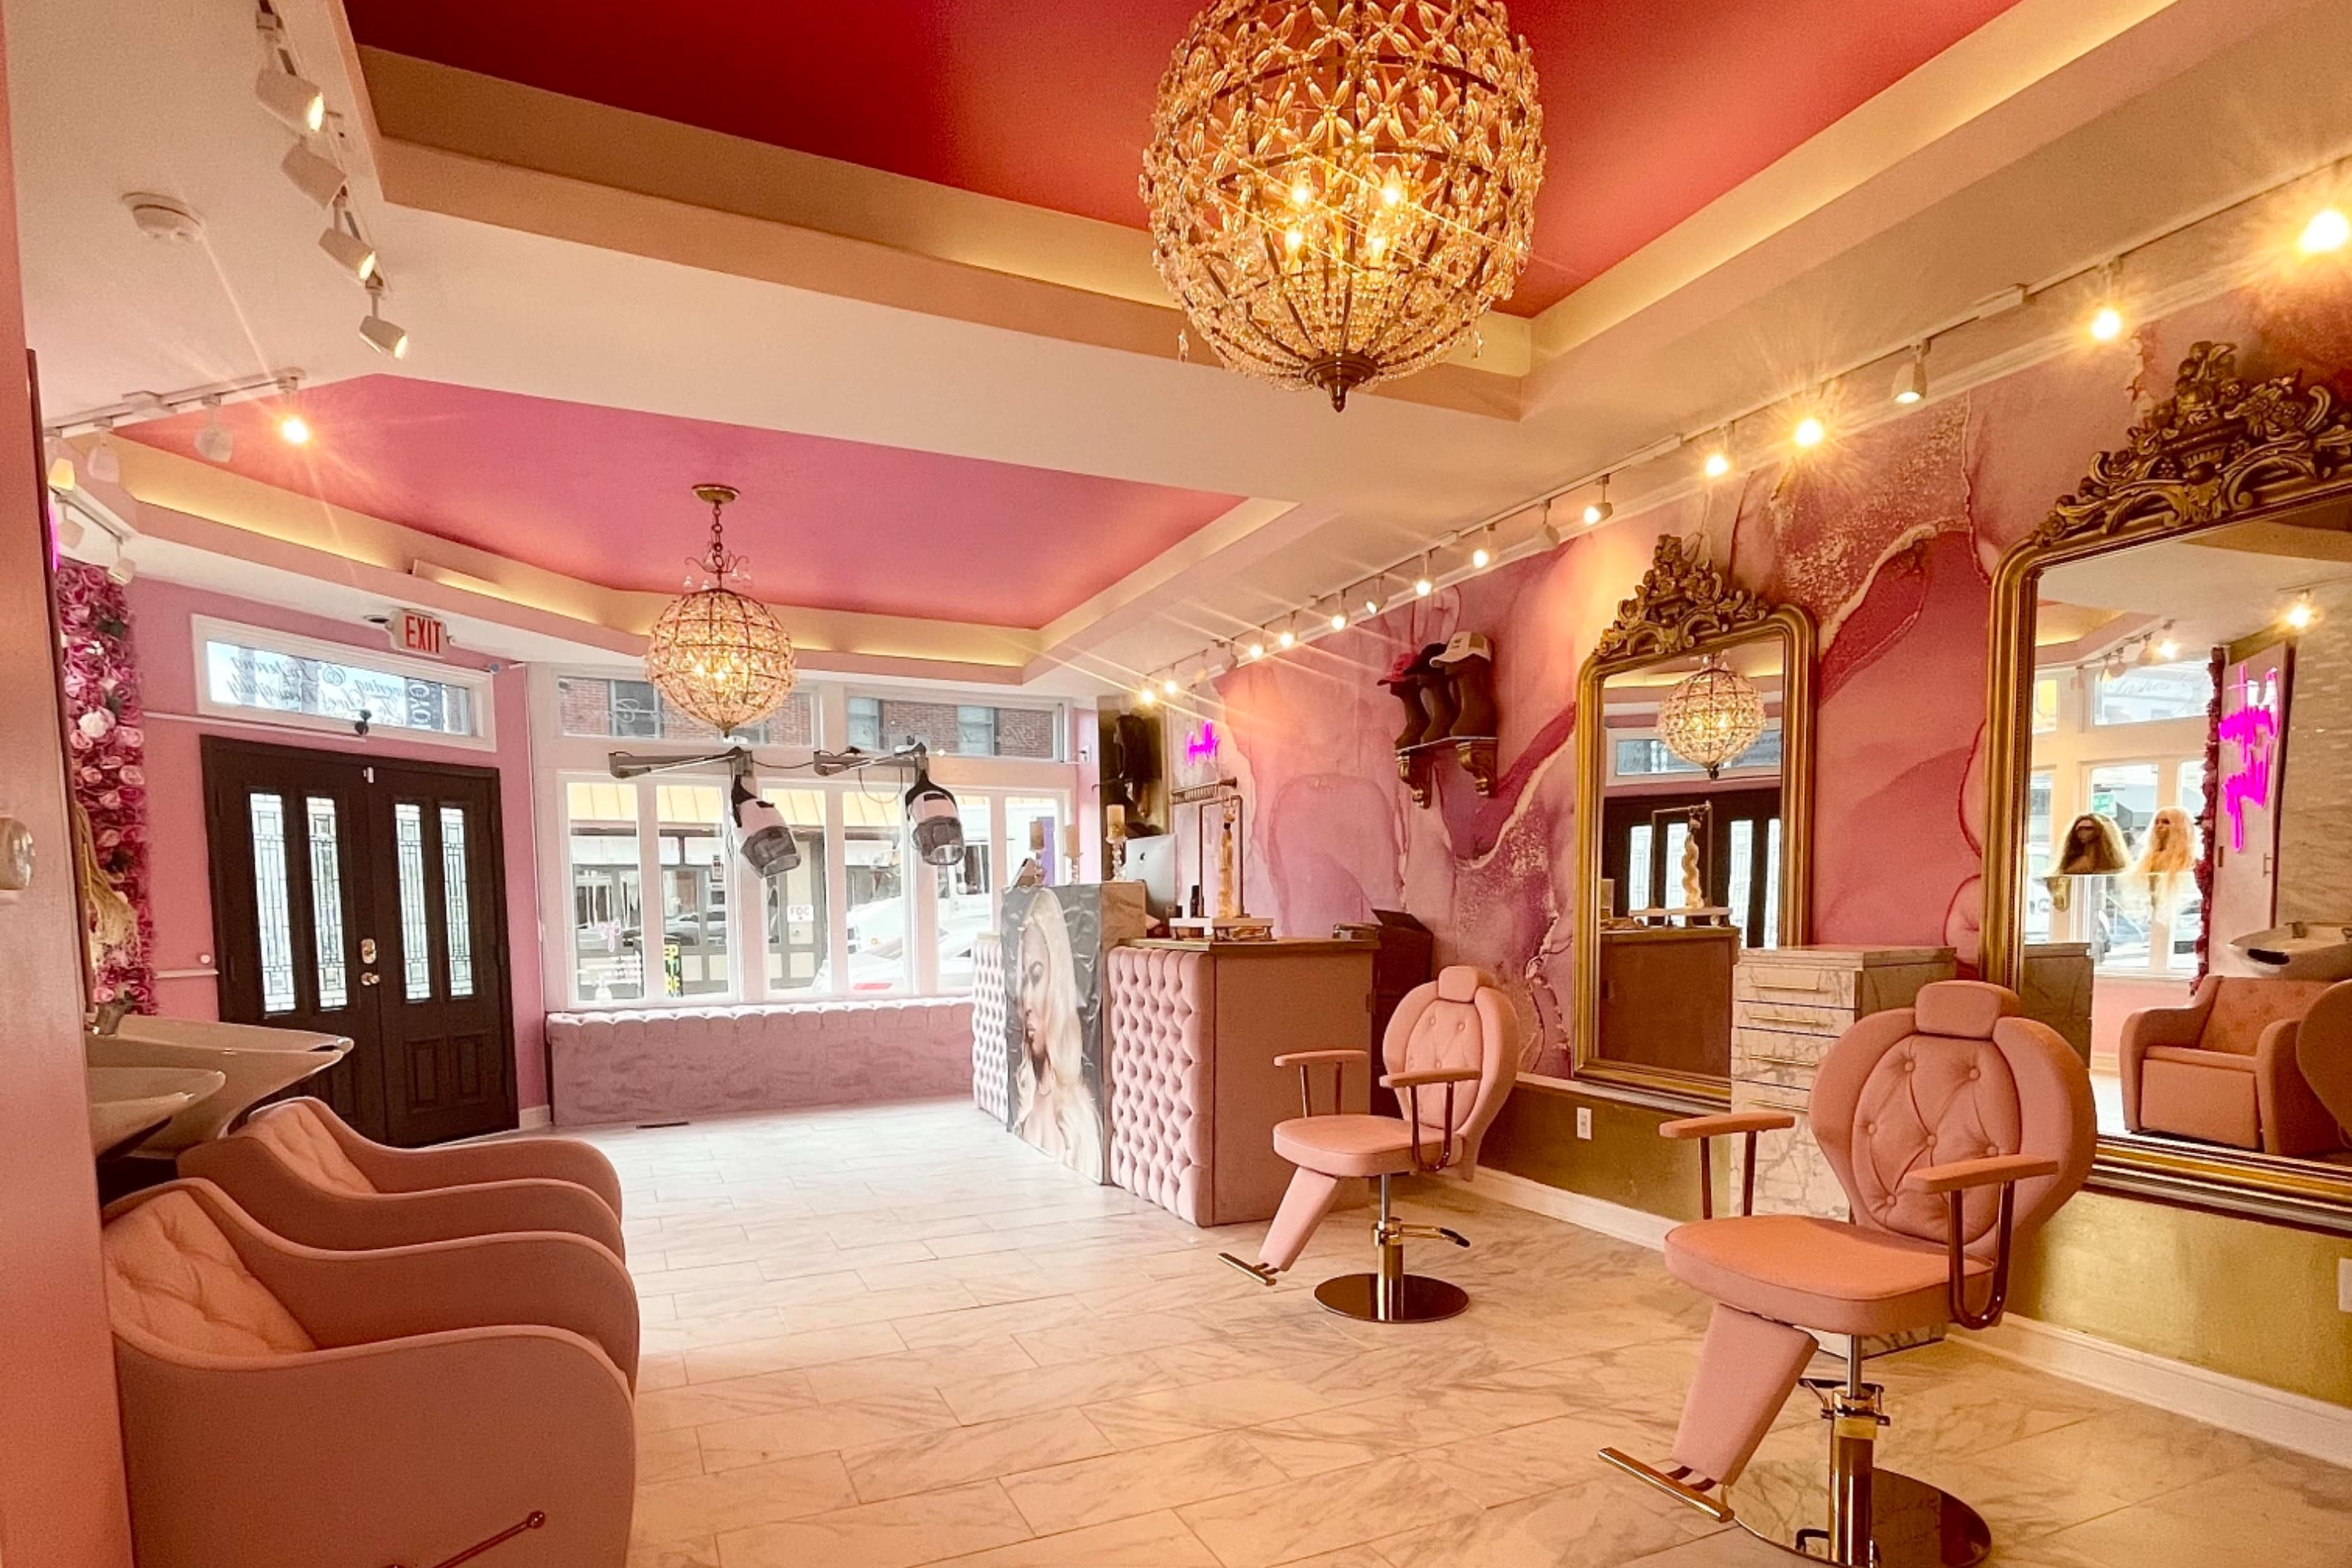 10 Best Salon & Beauty Parlor Locations for Rent in New York, NY